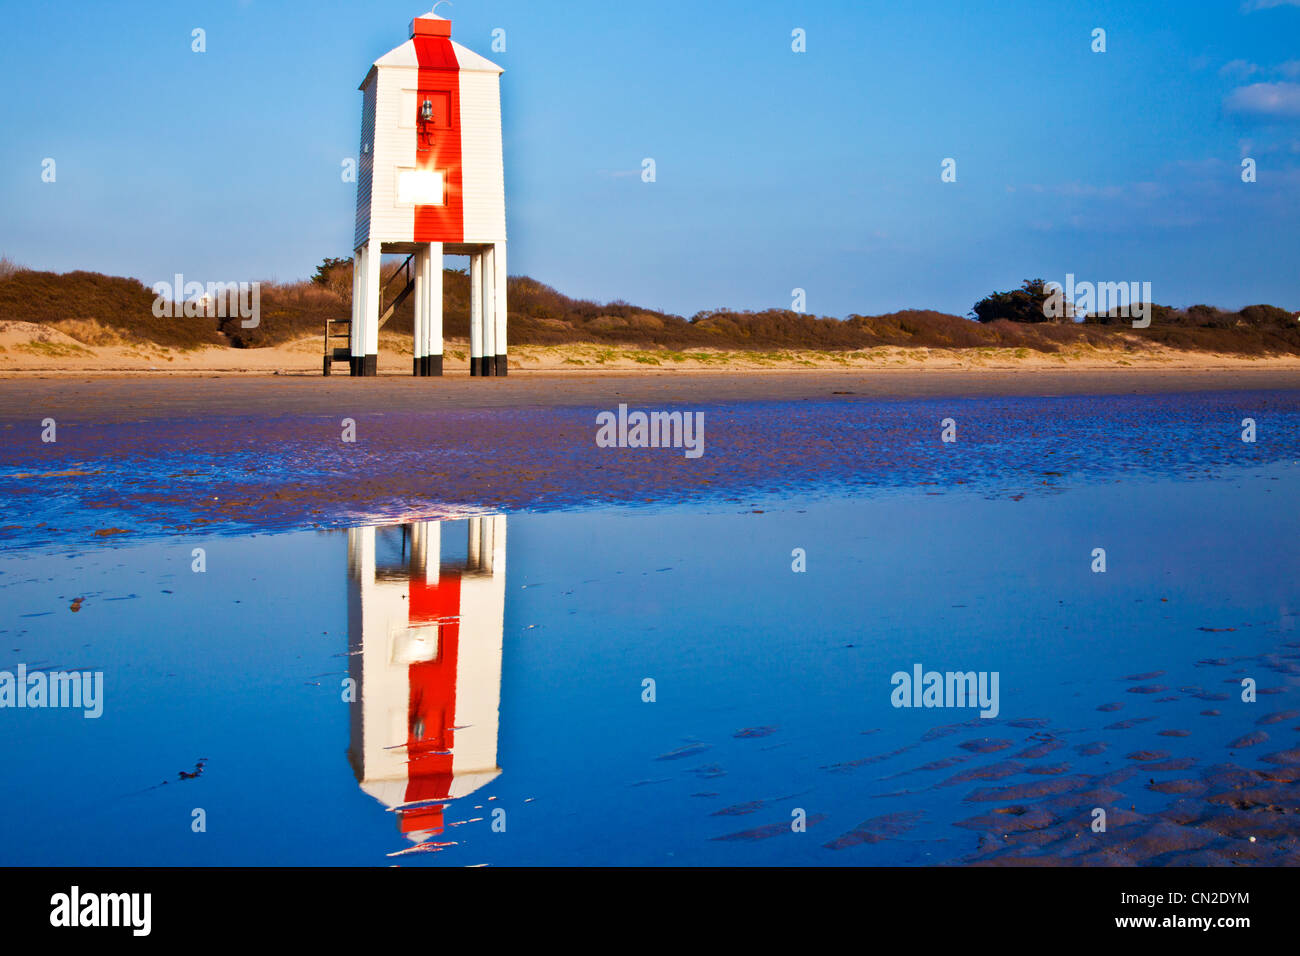 The unusual lighthouse on stilts at Burnham-on-Sea, Somerset, England, UK reflected in a tidal pool Stock Photo